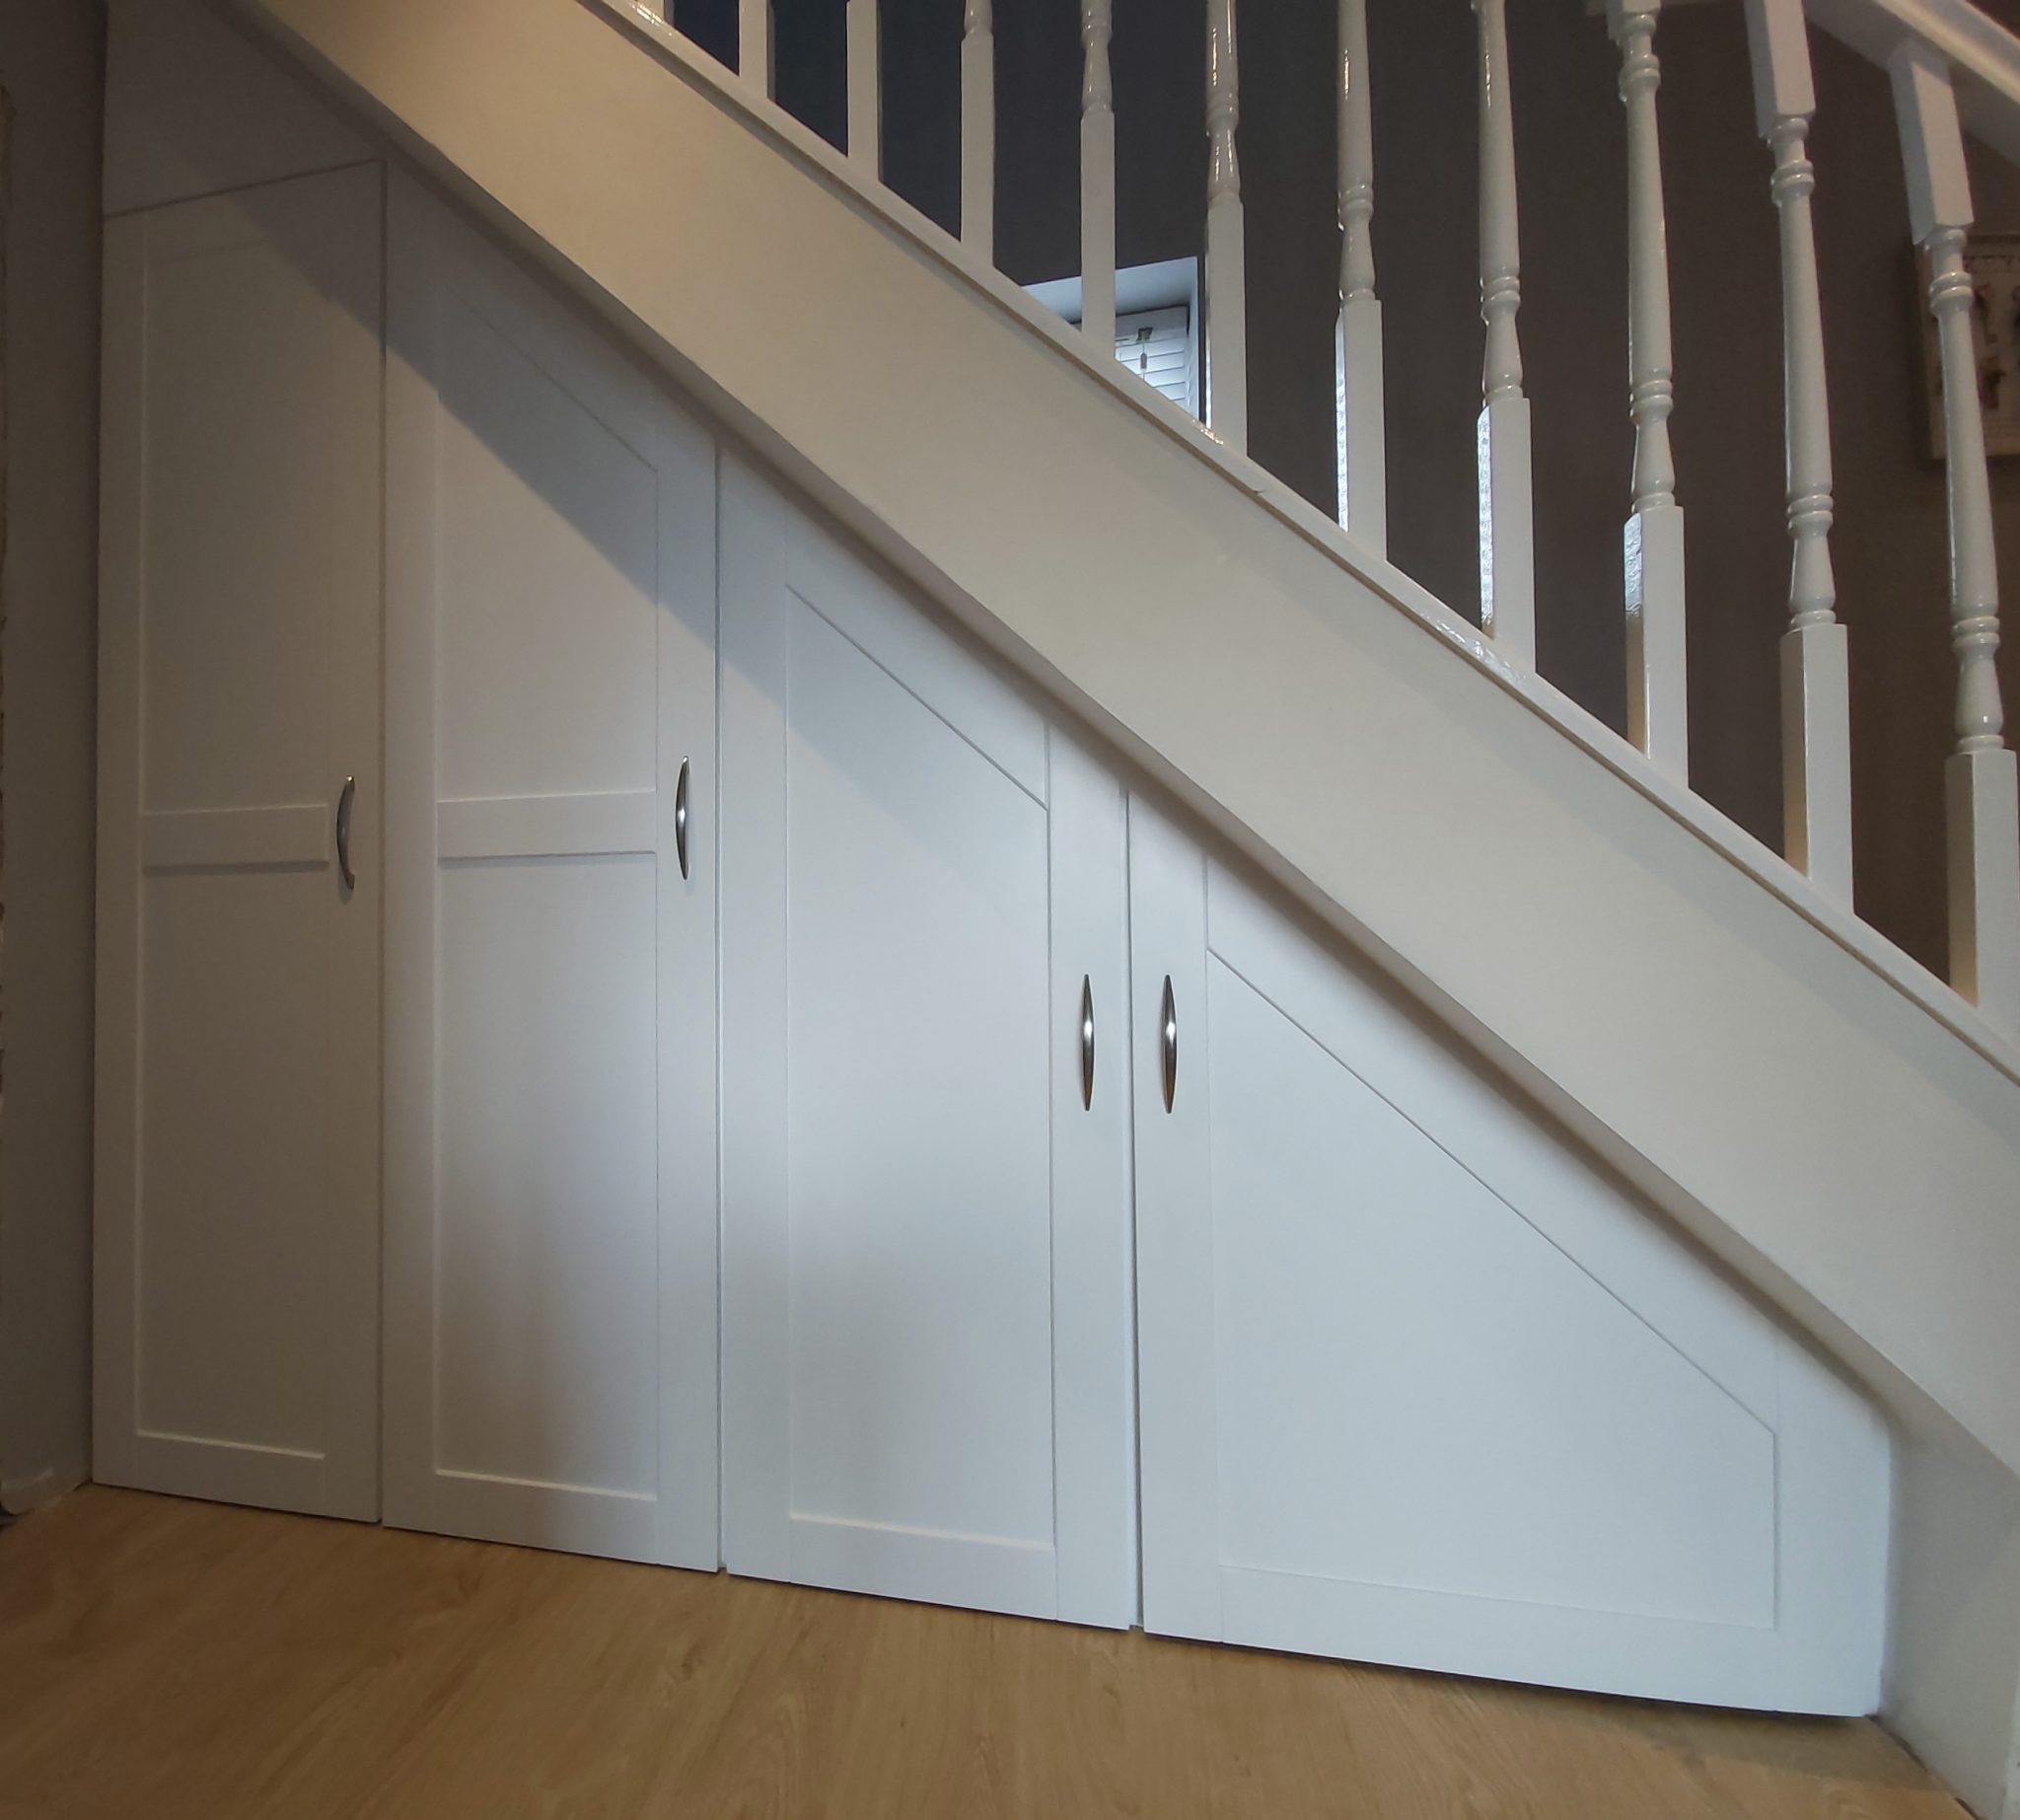 Under stair cupboard - Design Woodwork - Making wood work for you